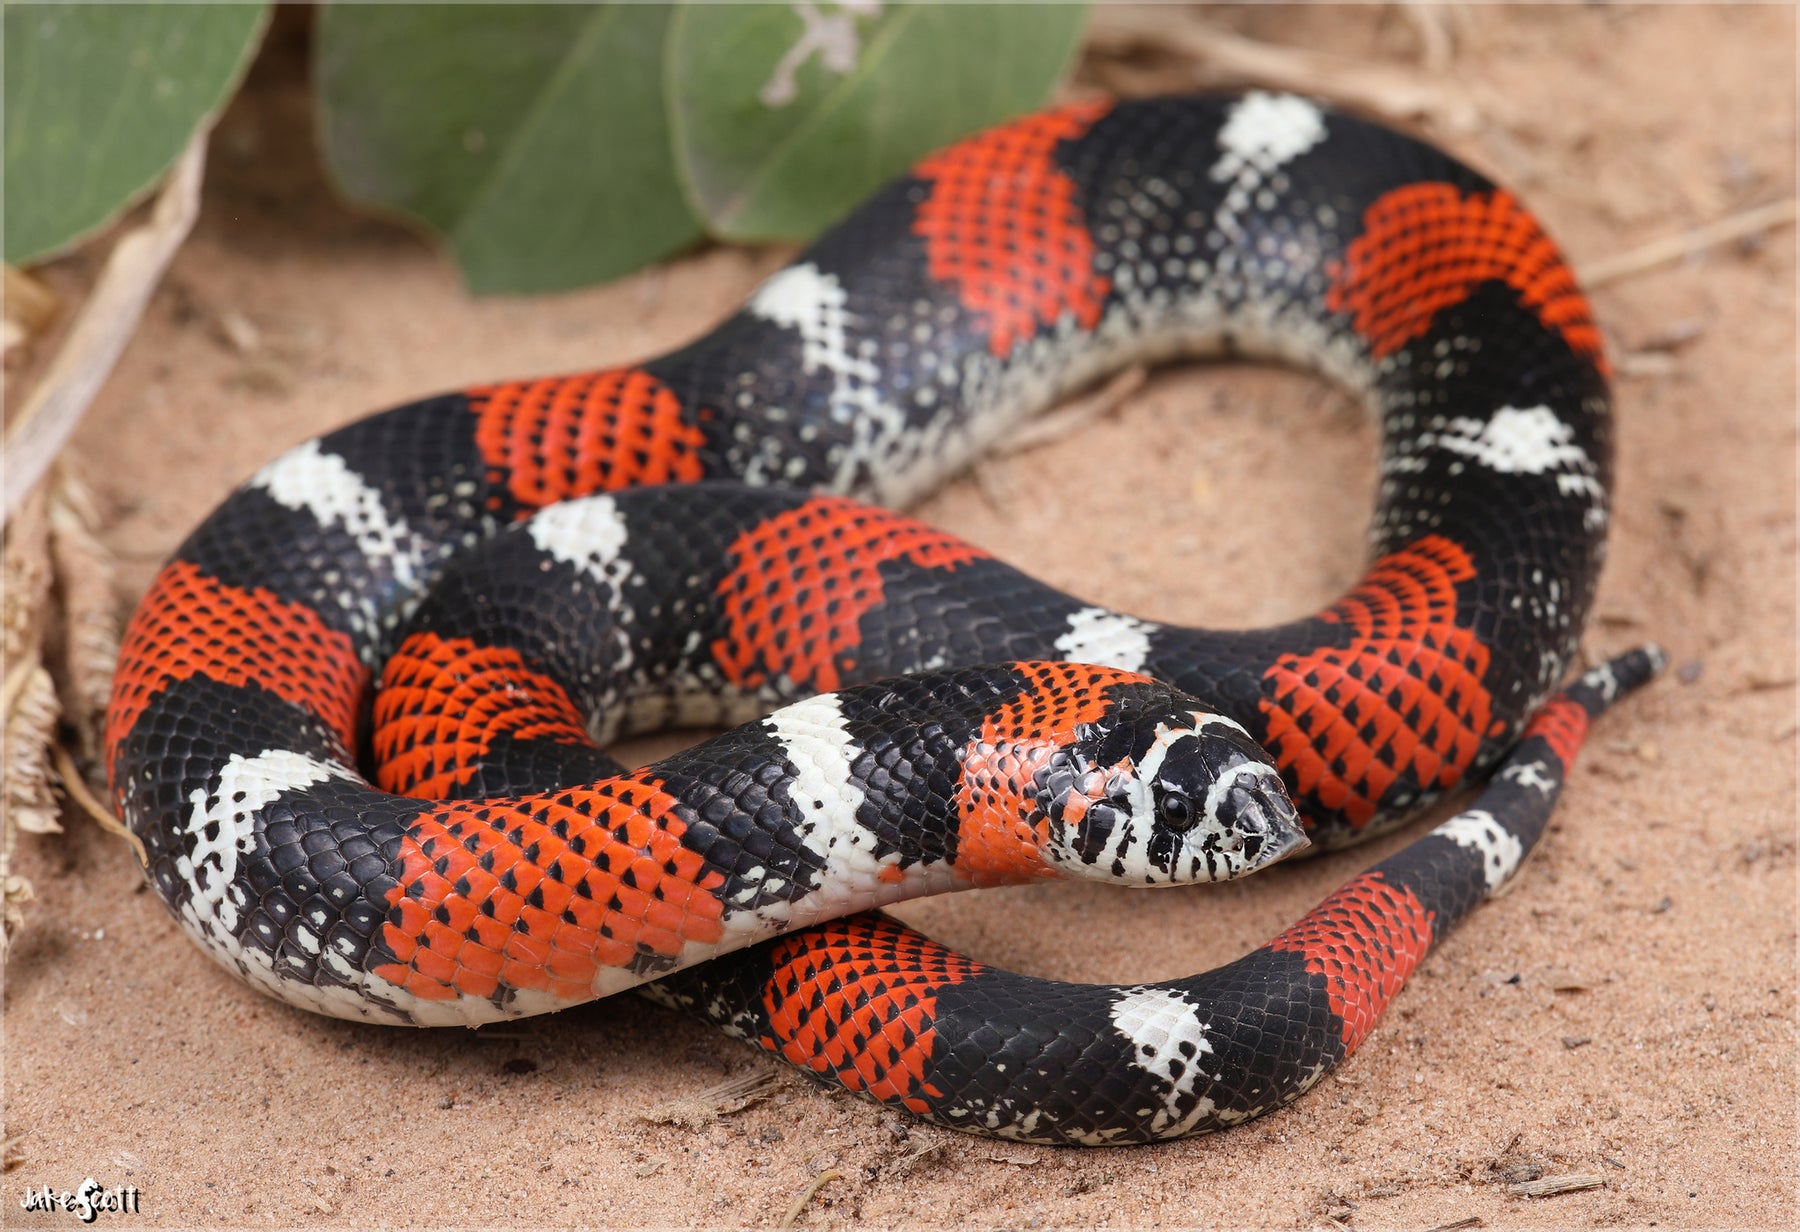 How to Care for Your Tricolor Hognose Snake